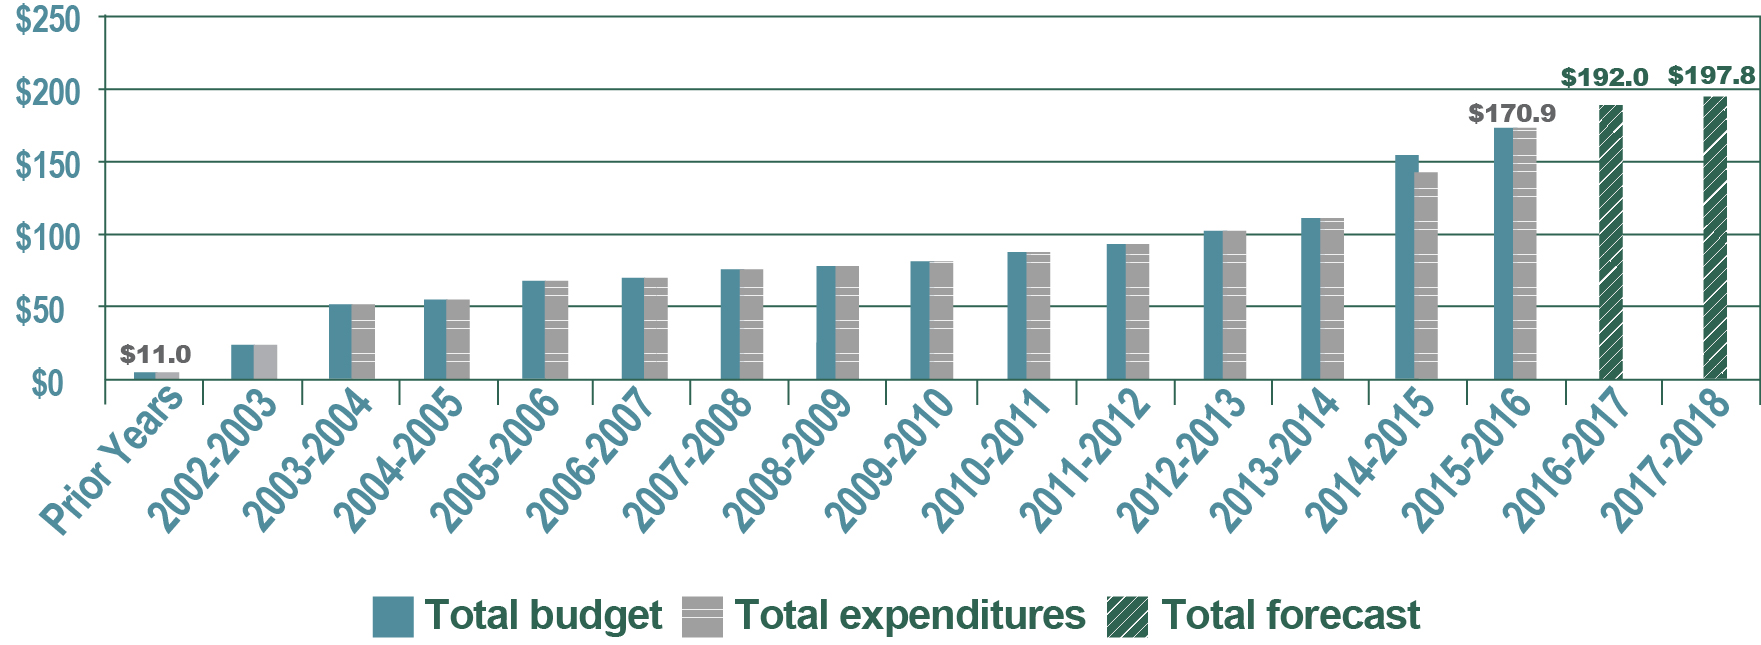 Figure 14—Long Term Vision and Plan Recapitalization program cumulative expenditures, forecasts and budgets—Fiscal year 2015 to 2016 (in millions of dollars) - See description below.